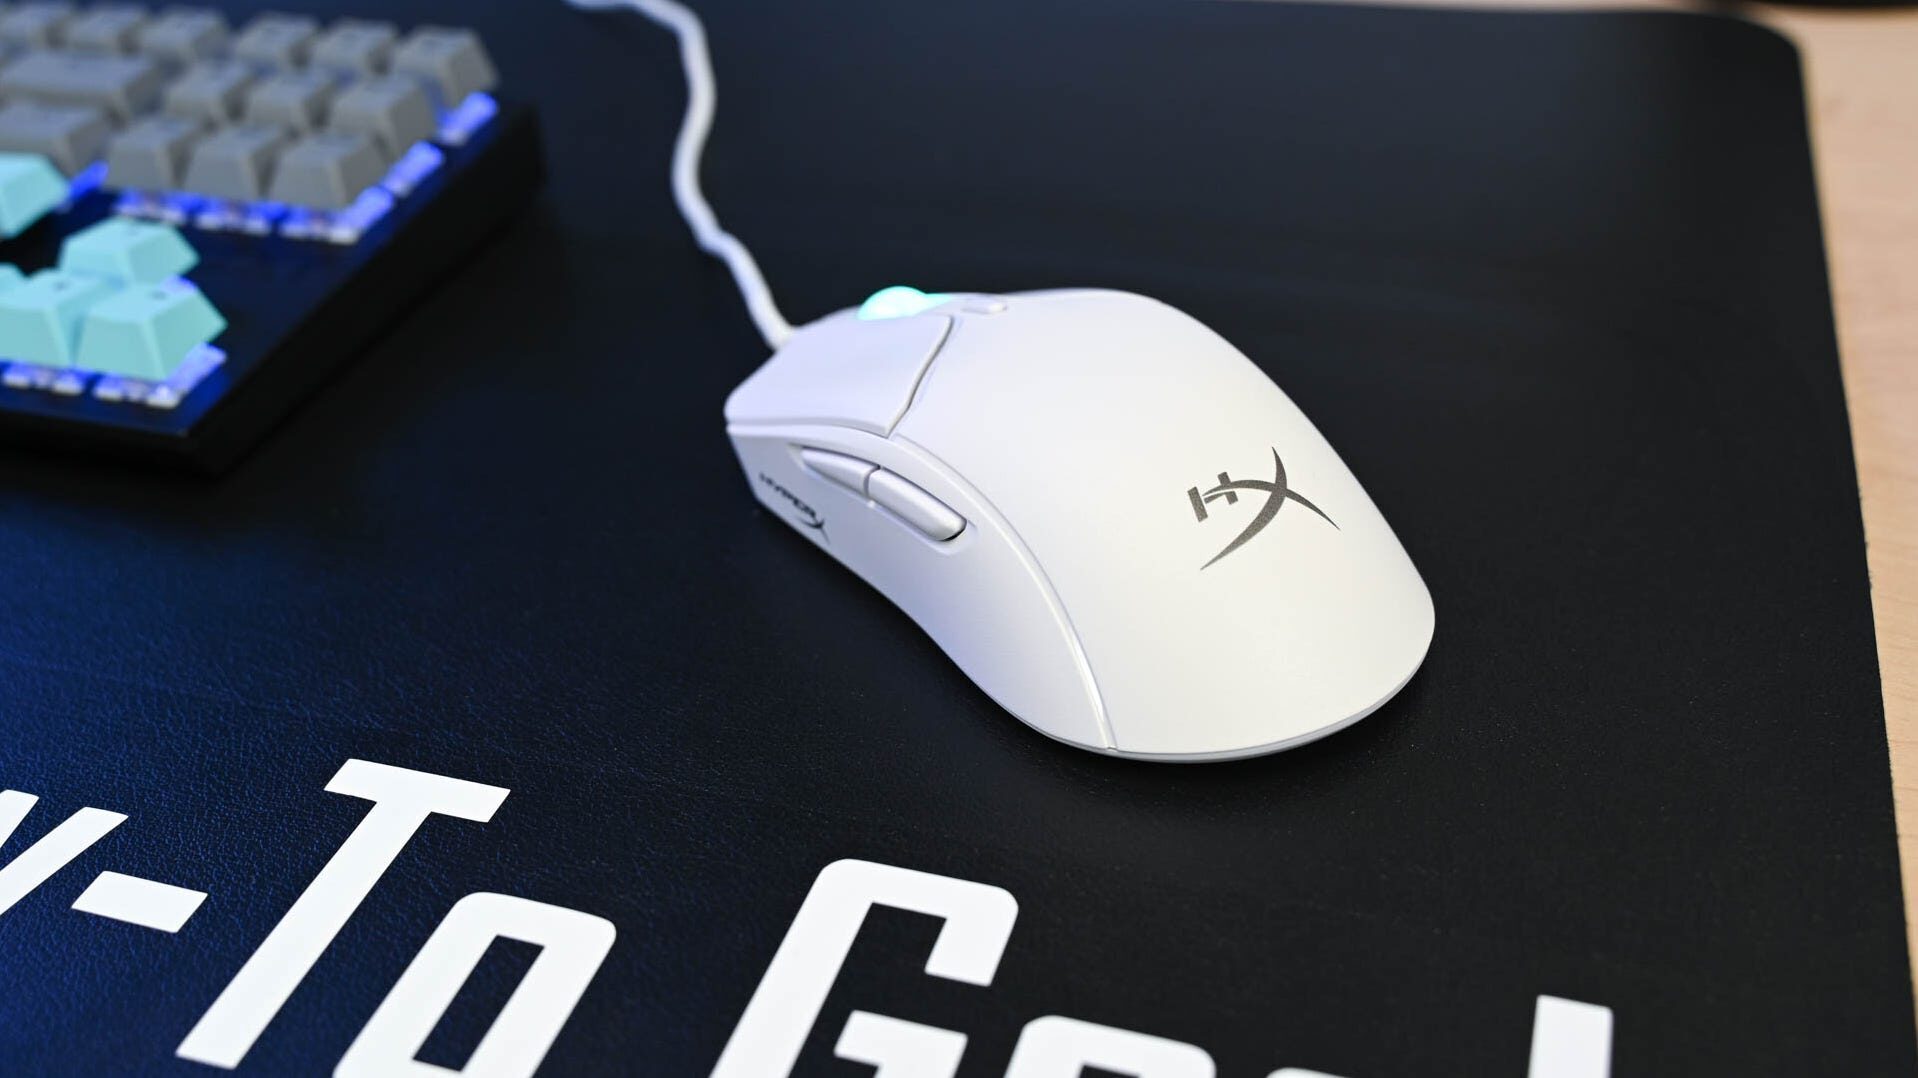 side-buttons-on-the-hyperx-haste-2-gaming-mousejpg_52762452325_o-9168410-4834057